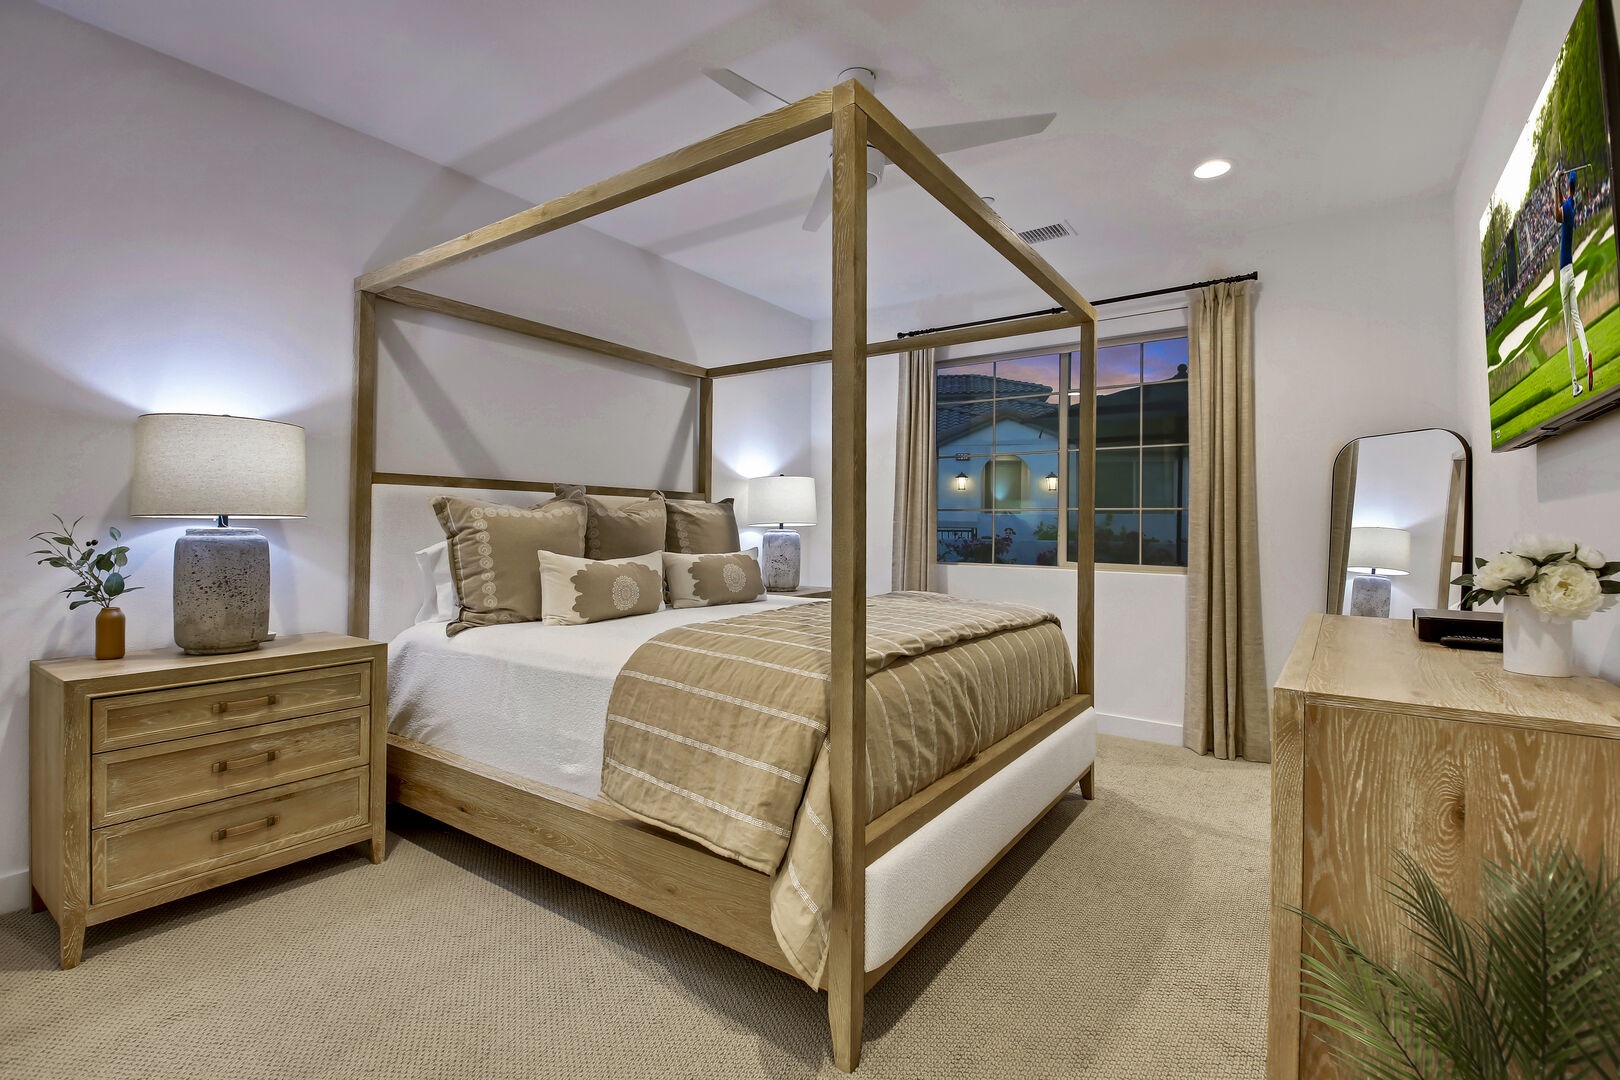 Master Suite 1 is located next to entrance doors and features a King-sized Bed.